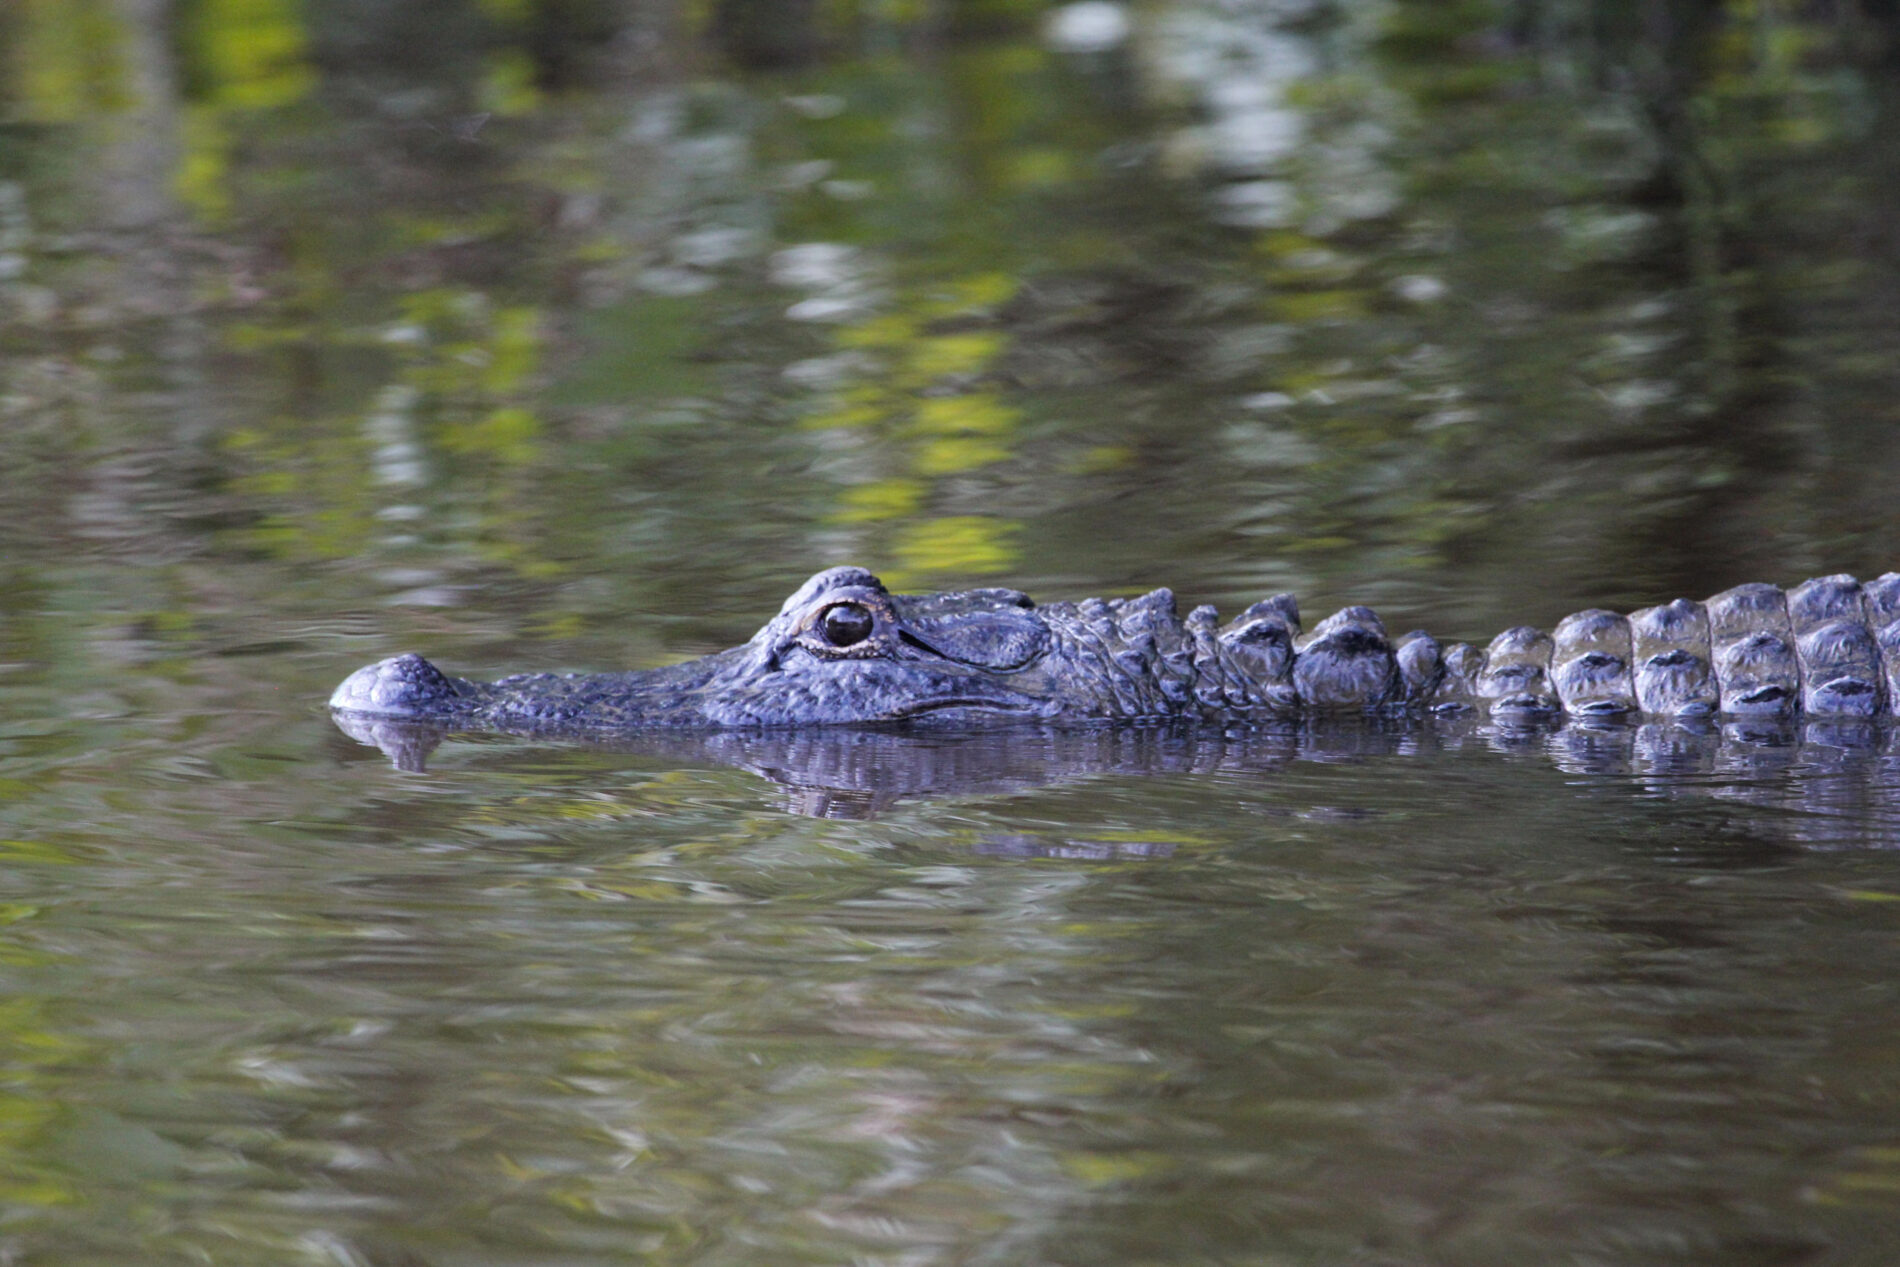 We saw many alligators on our gator tour of the Louisiana swamps.